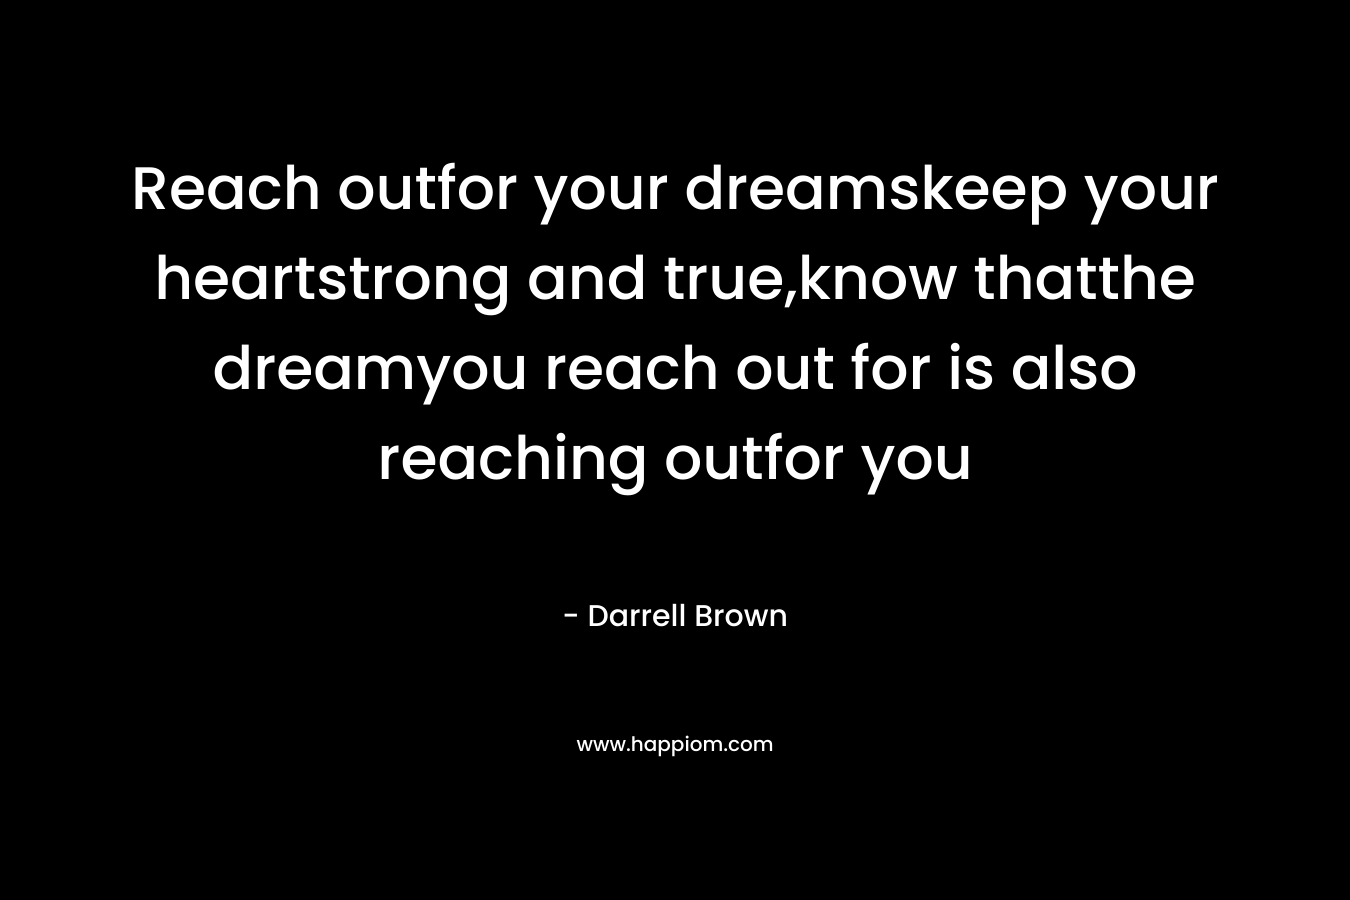 Reach outfor your dreamskeep your heartstrong and true,know thatthe dreamyou reach out for is also reaching outfor you – Darrell Brown